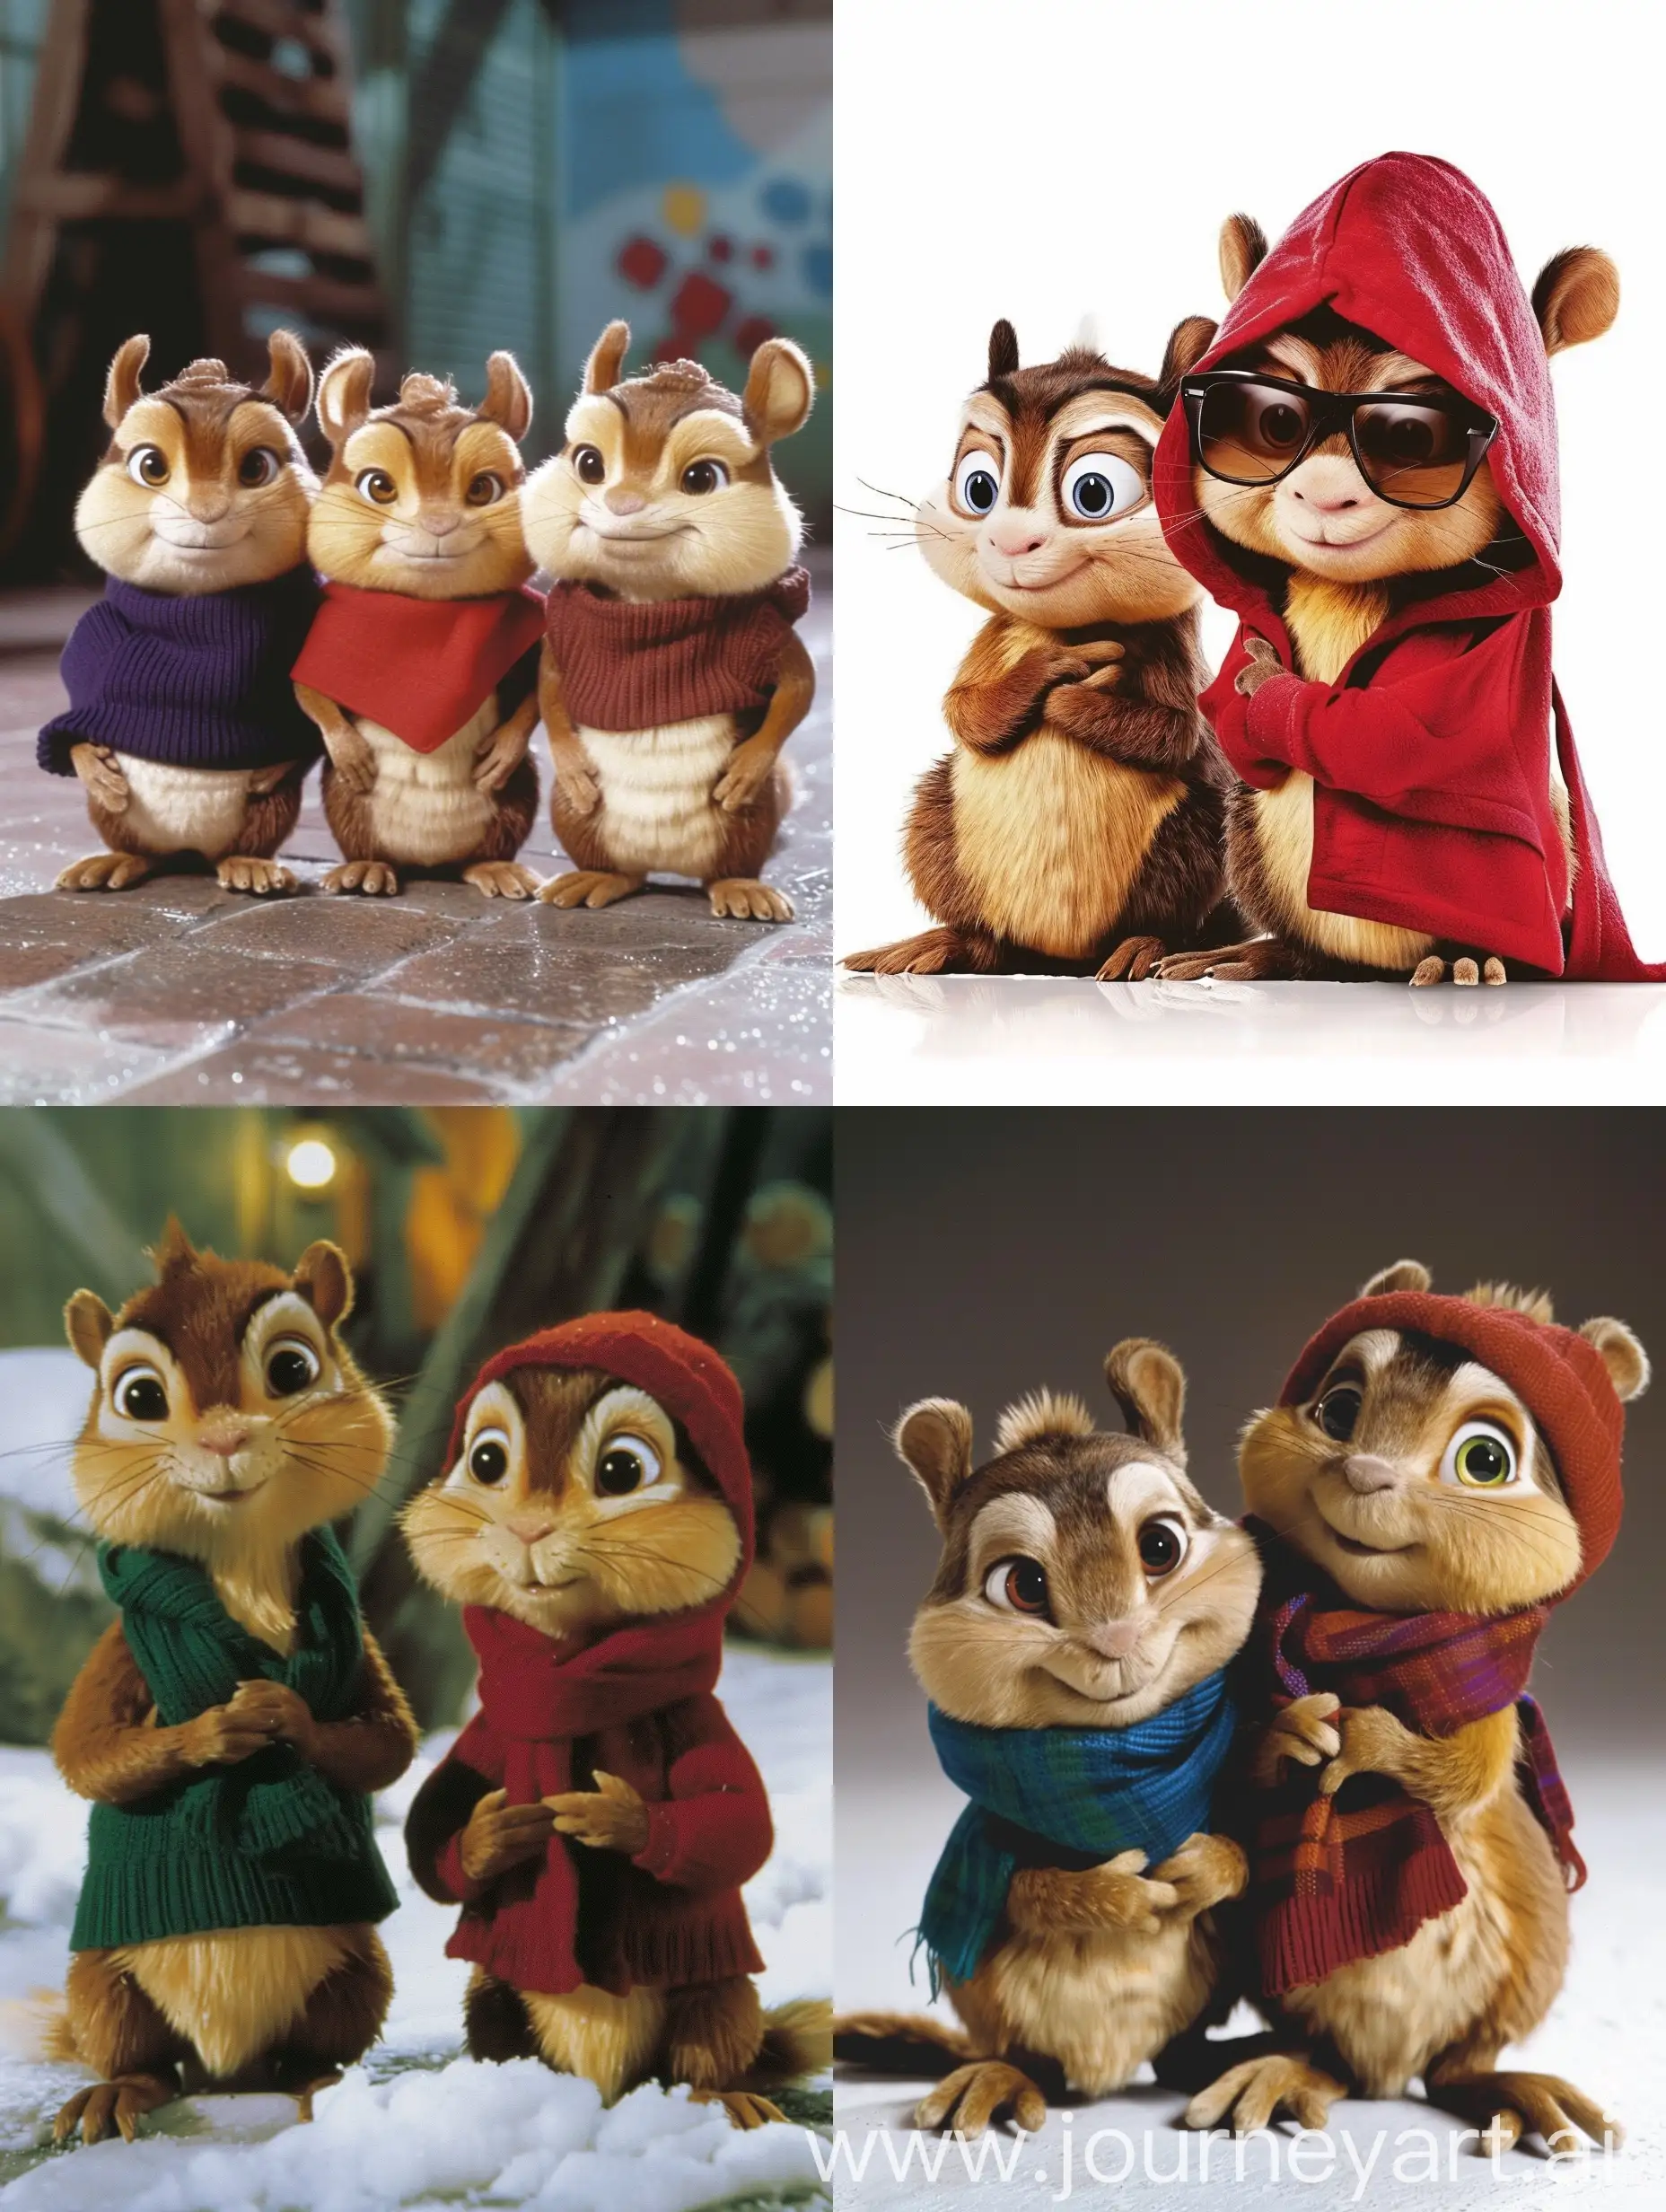 Adorable-Alvin-and-the-Chipmunks-Cartoon-Characters-in-a-Vibrant-Setting